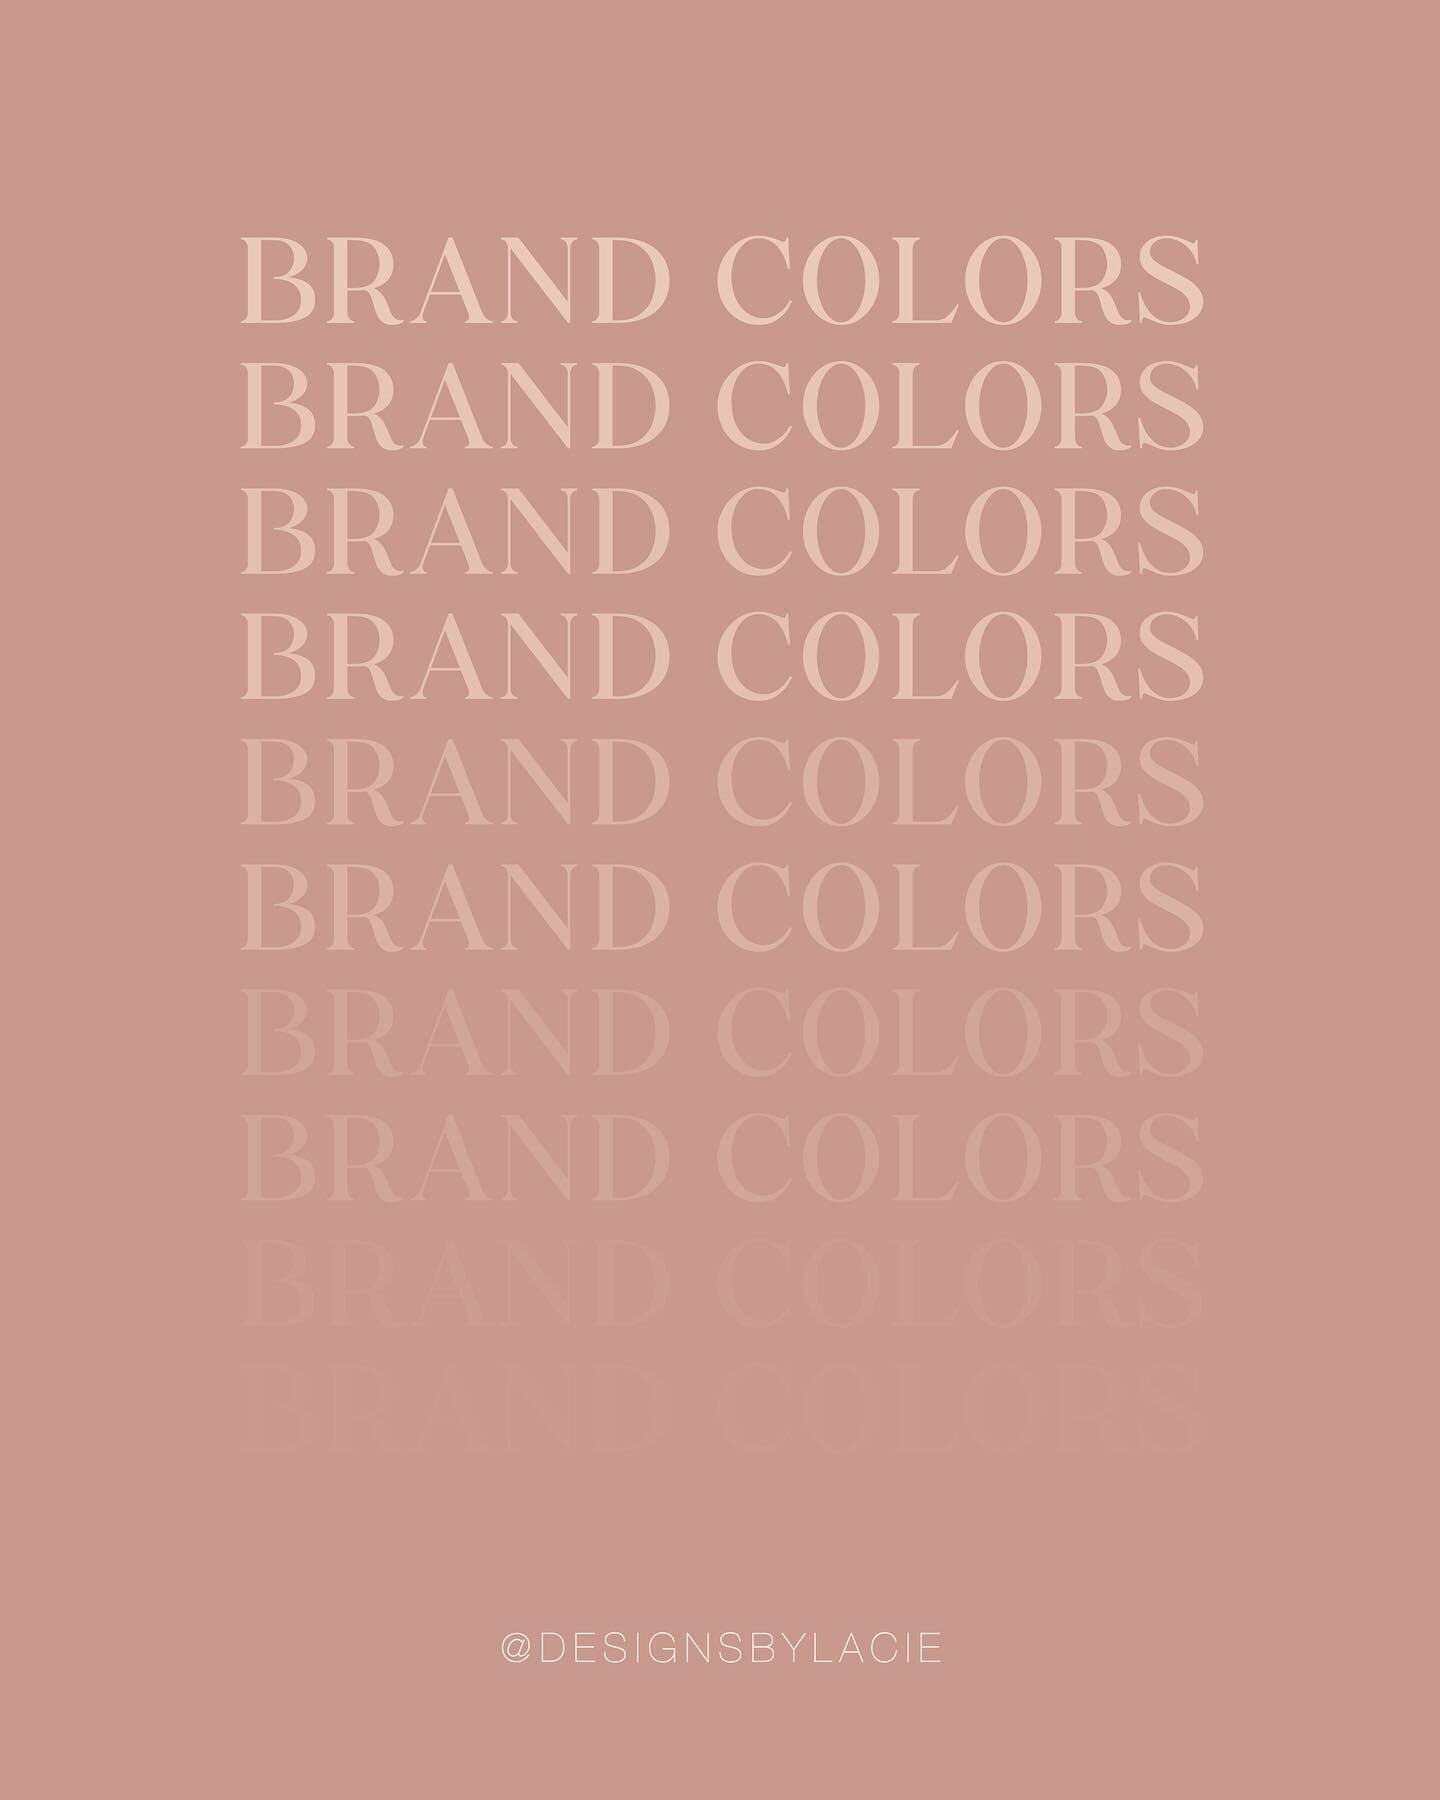 This week I am going to reveal my new brand identity. I wanted to start with my brand color palette. 

When you think of your favorite brand or store. Can you picture exactly what their color palette is? Color speaks volumes about a brand. These colo